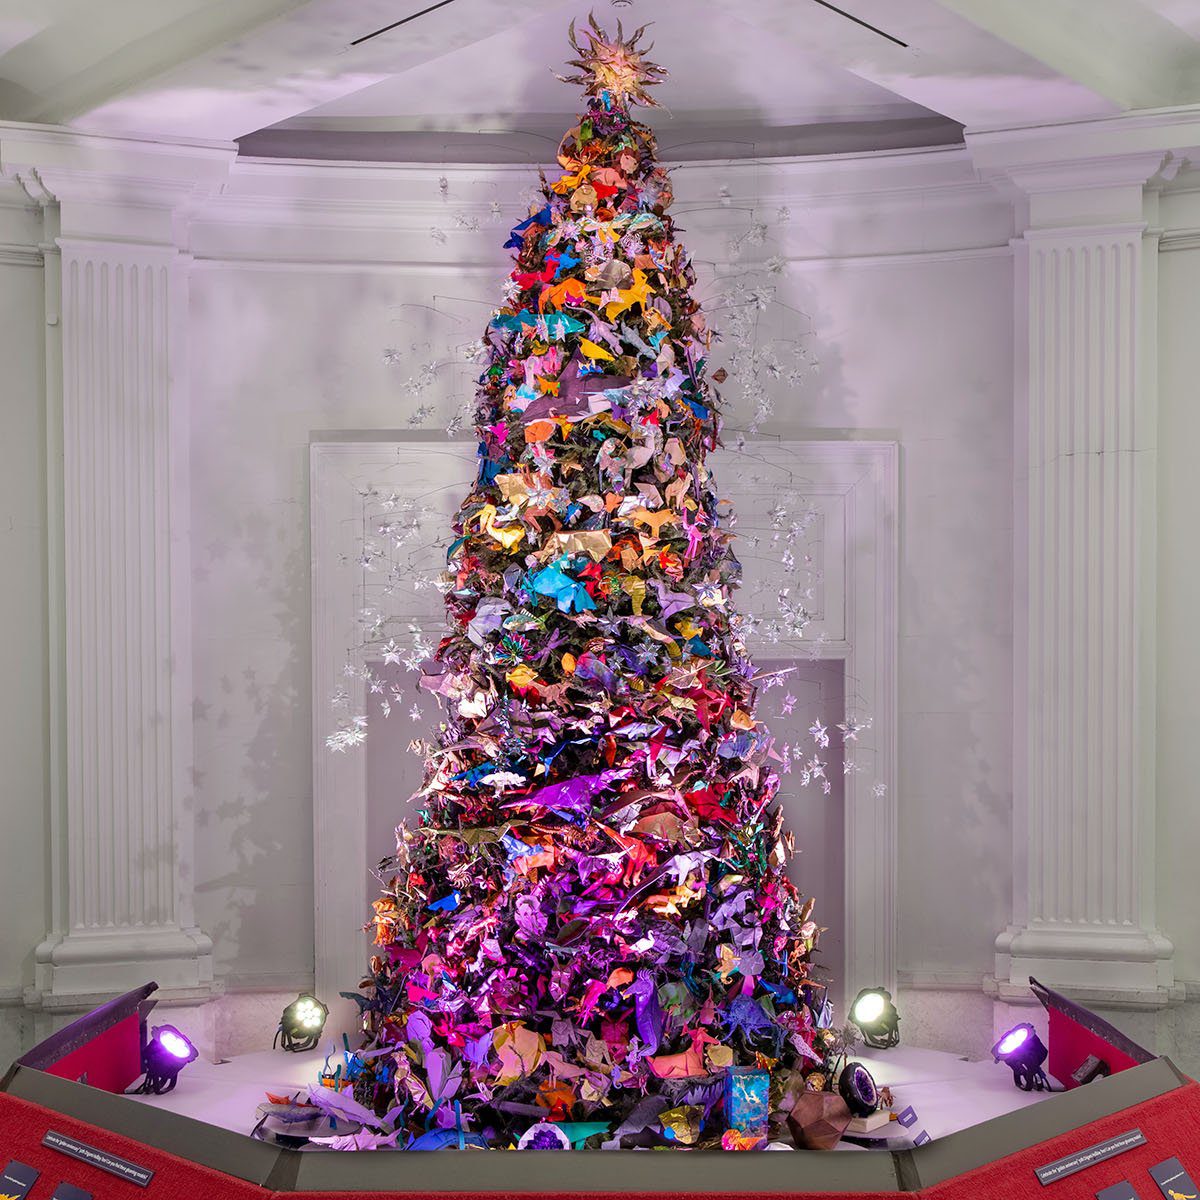 The Origami Holiday Tree Returns to American Museum of Natural History